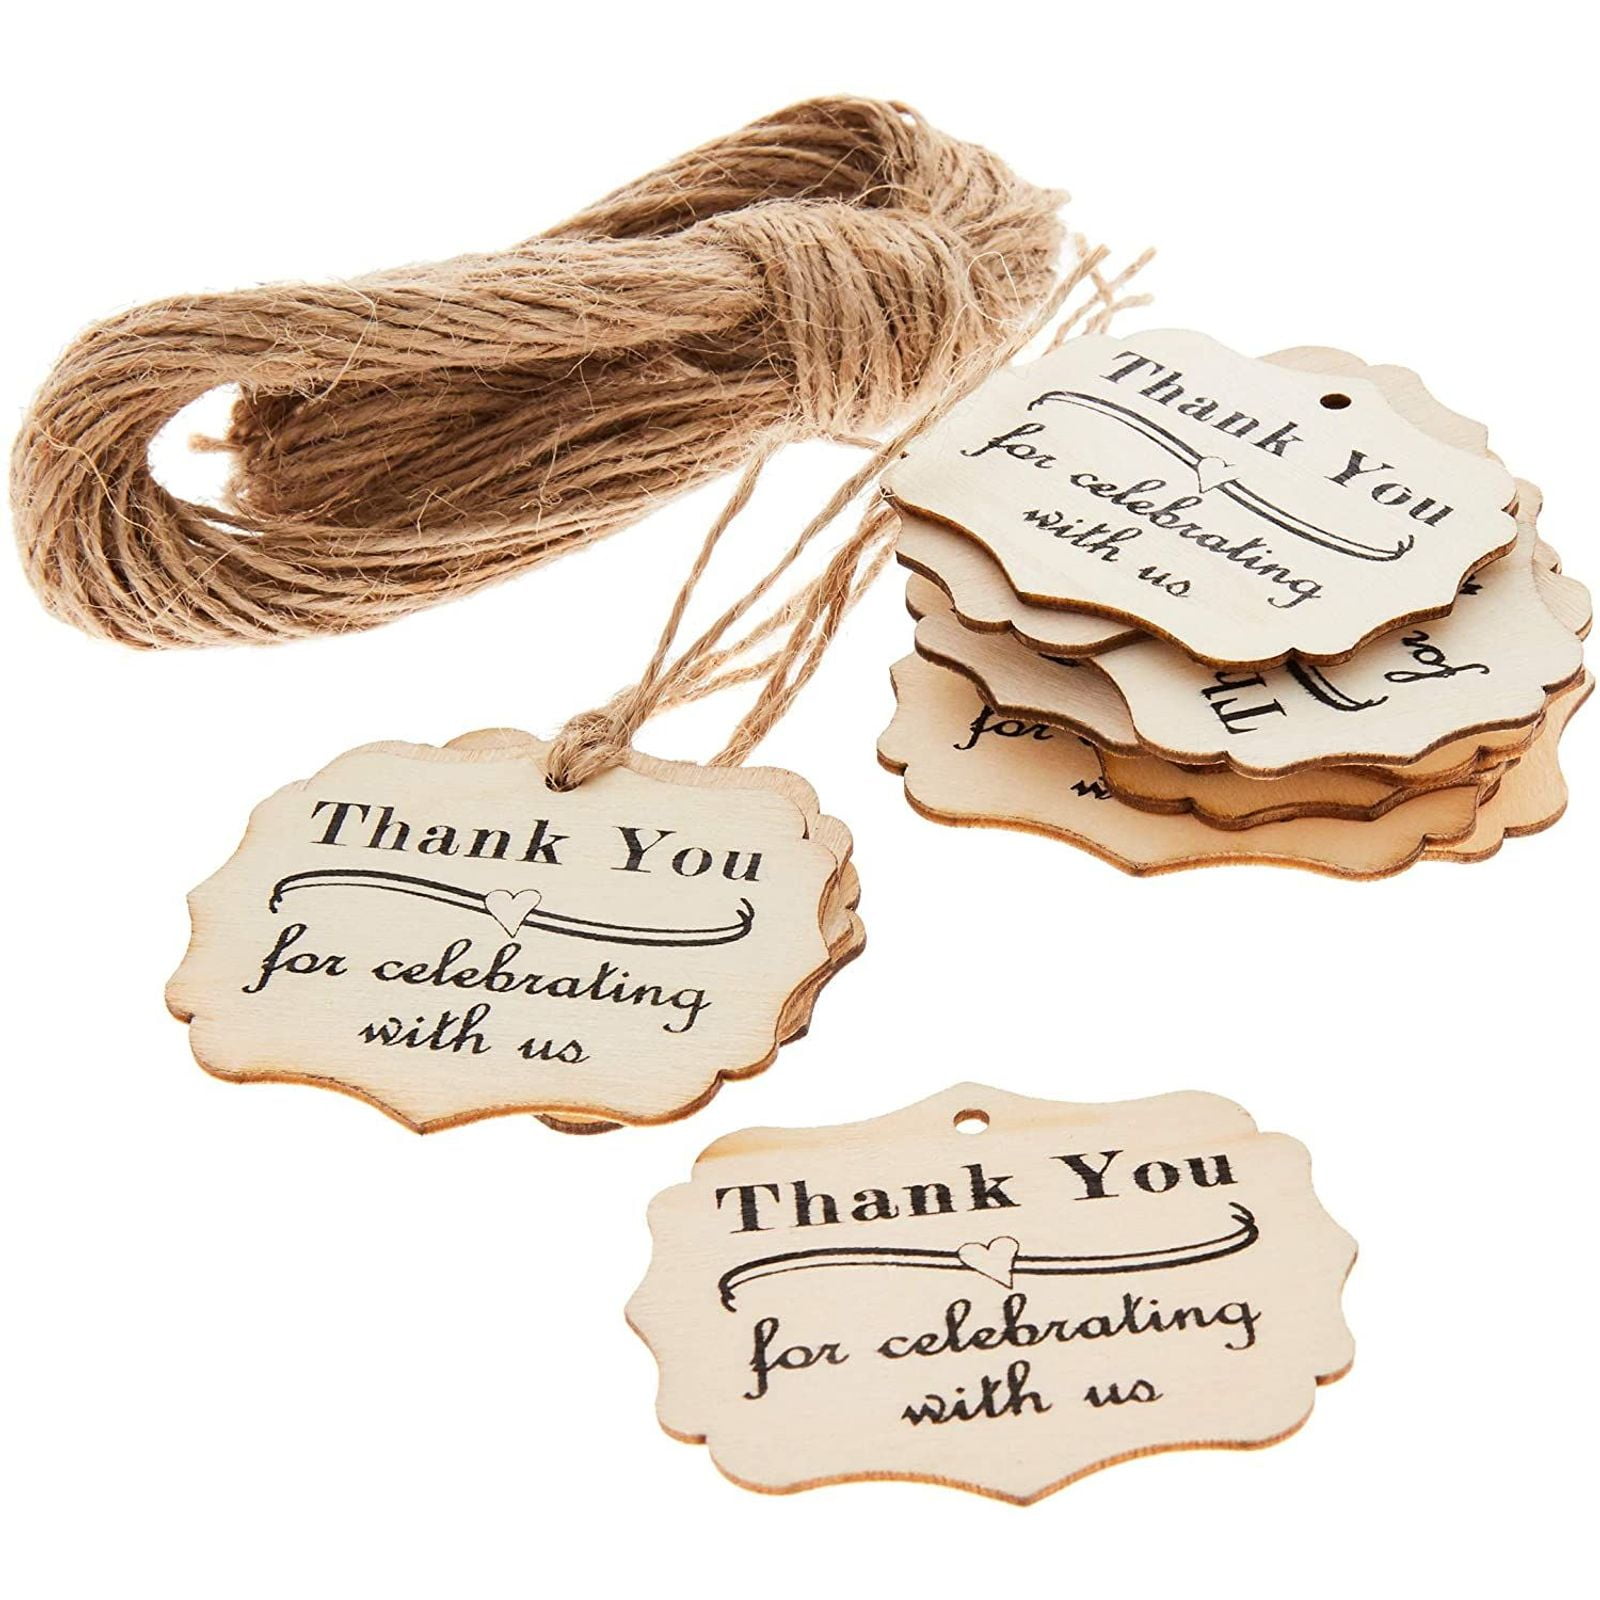 24 Rose Gold Foil Personalize Wedding Party Thank You Gift Tags Wedding Labels 